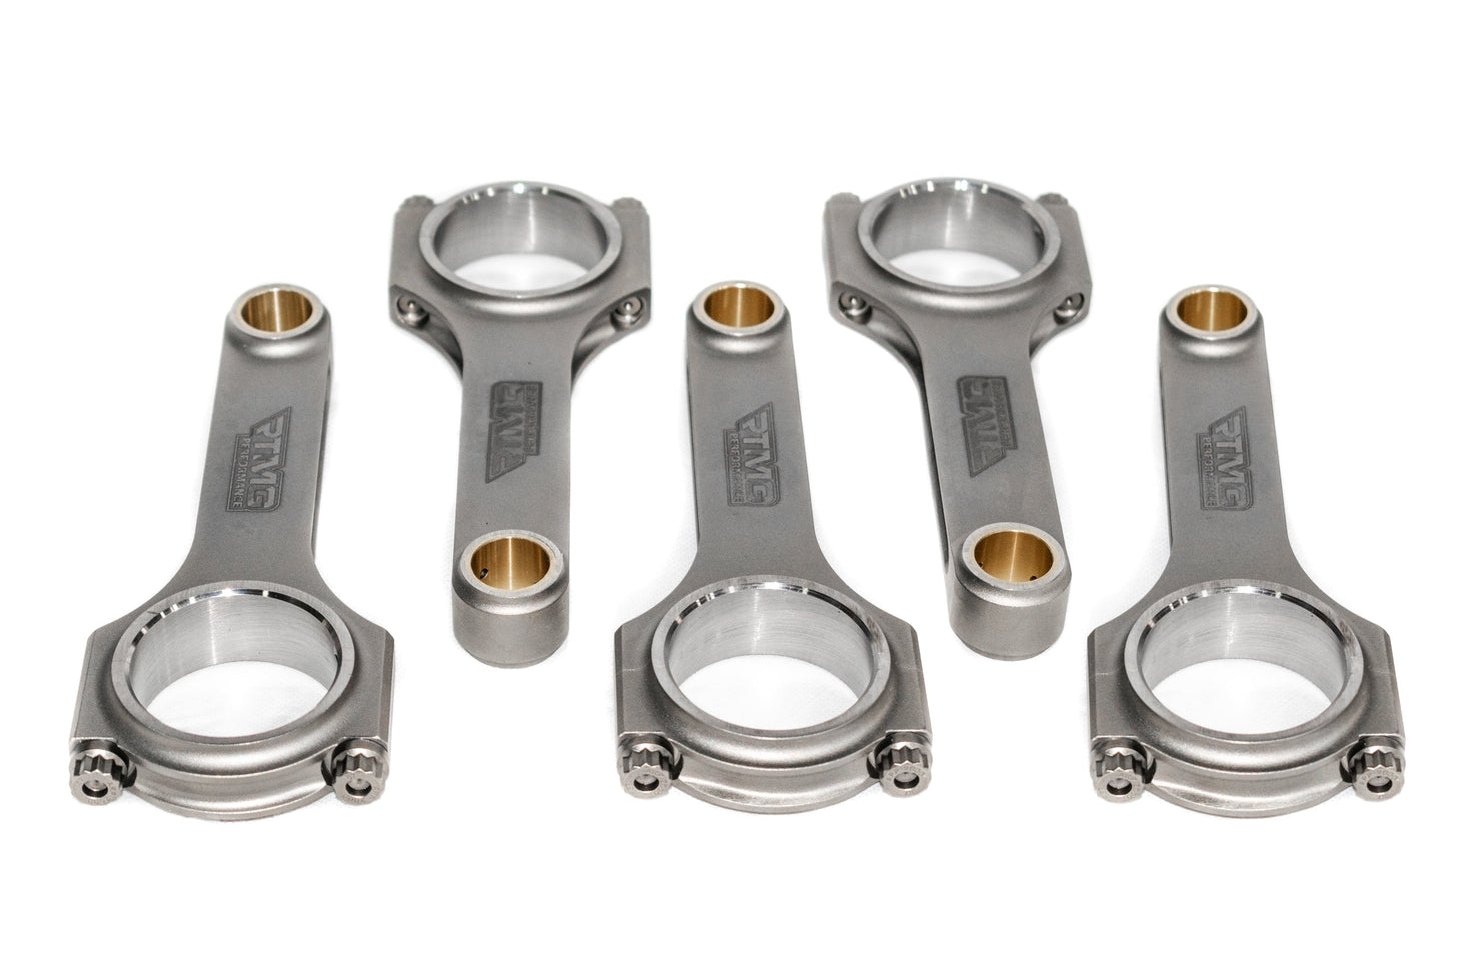 Connecting Rods Set H-Beam for 2.5 TFSI EA855 EVO - Up to 700HP - RTMG Performance